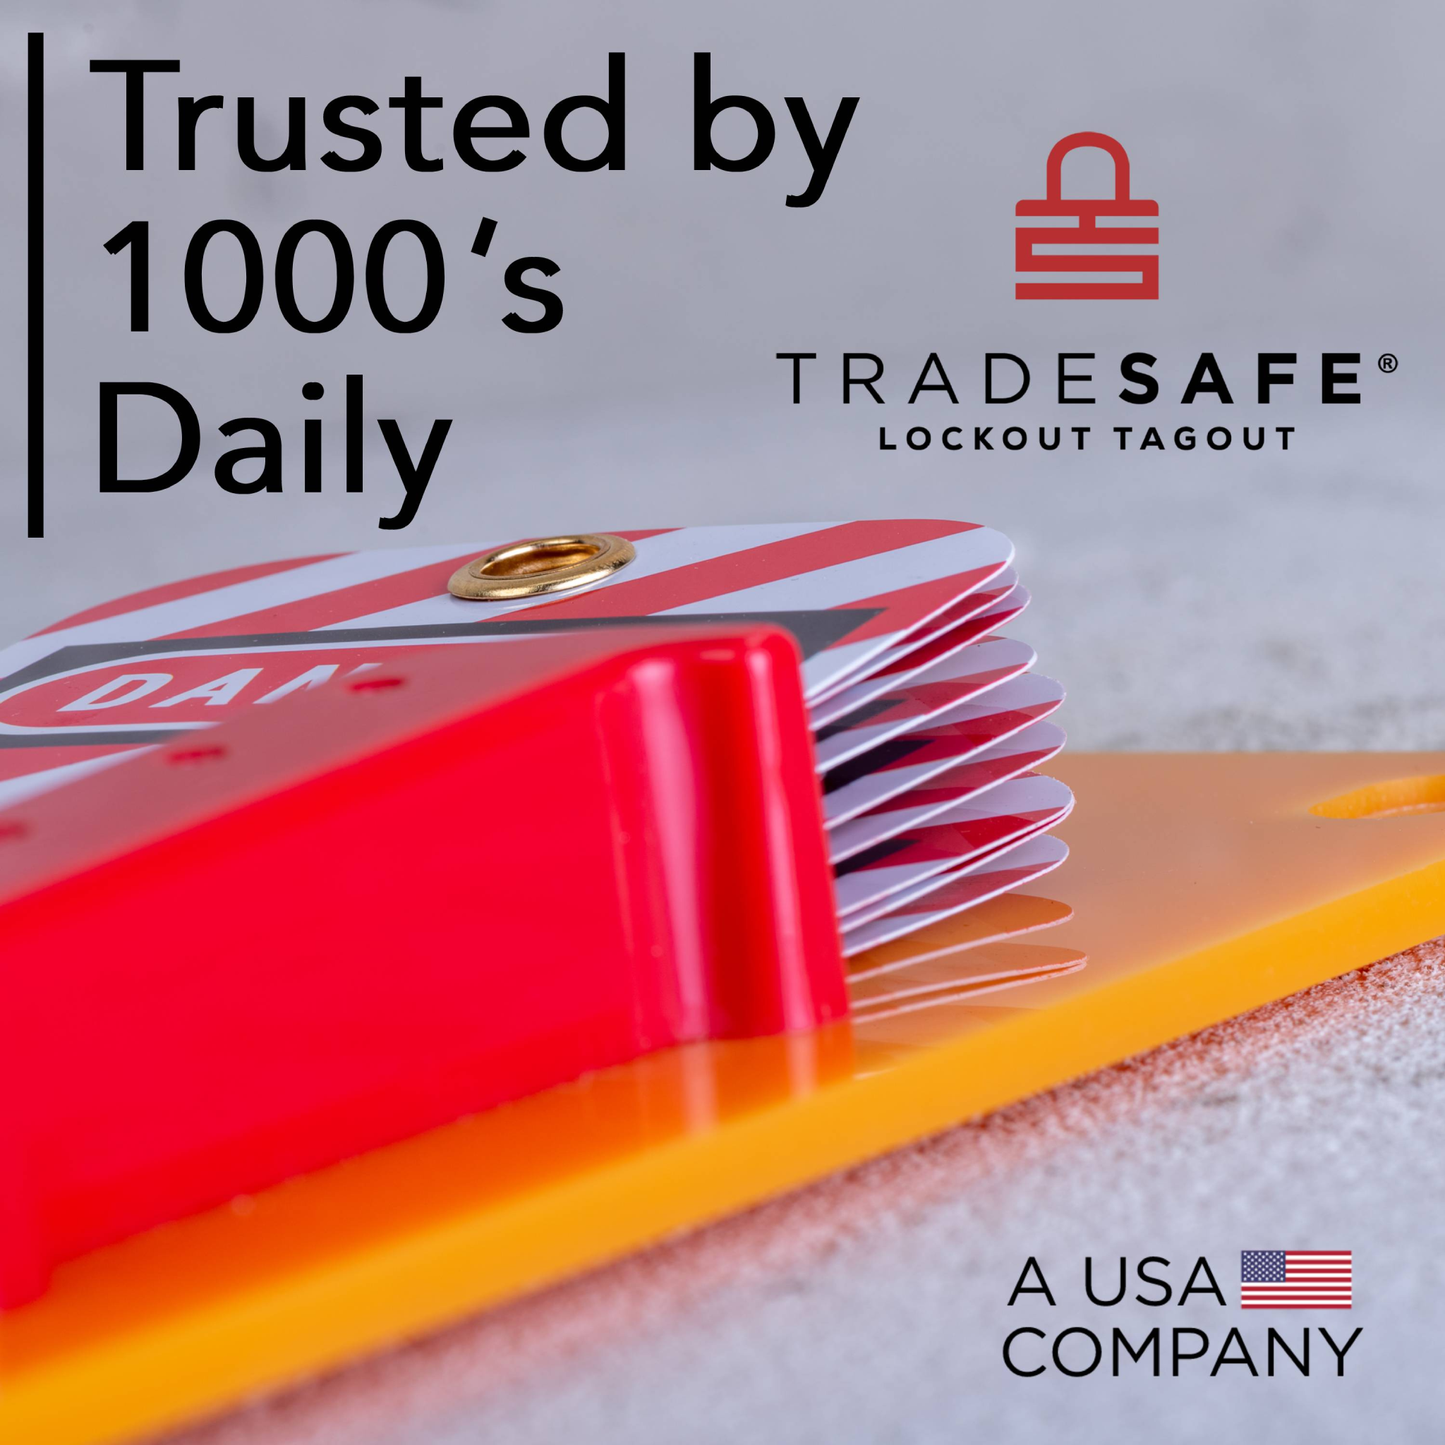 tradesafe tagout station trusted by 1000's daily